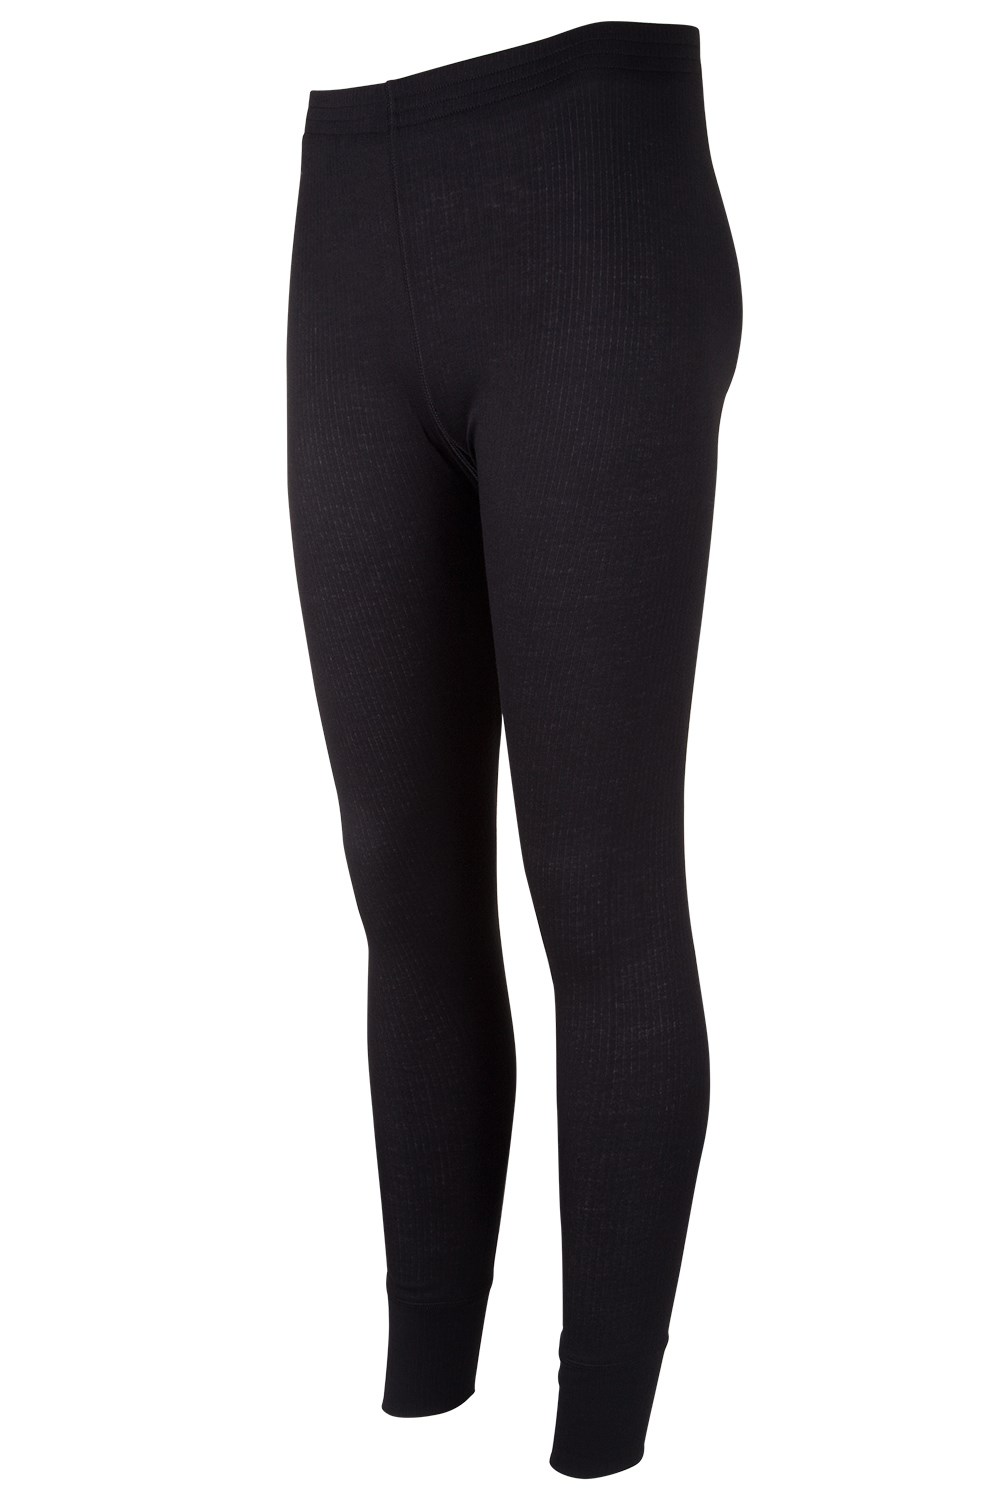 Mountain Warehouse Talus Womens Base Layer Pants Black 2 : :  Clothing, Shoes & Accessories